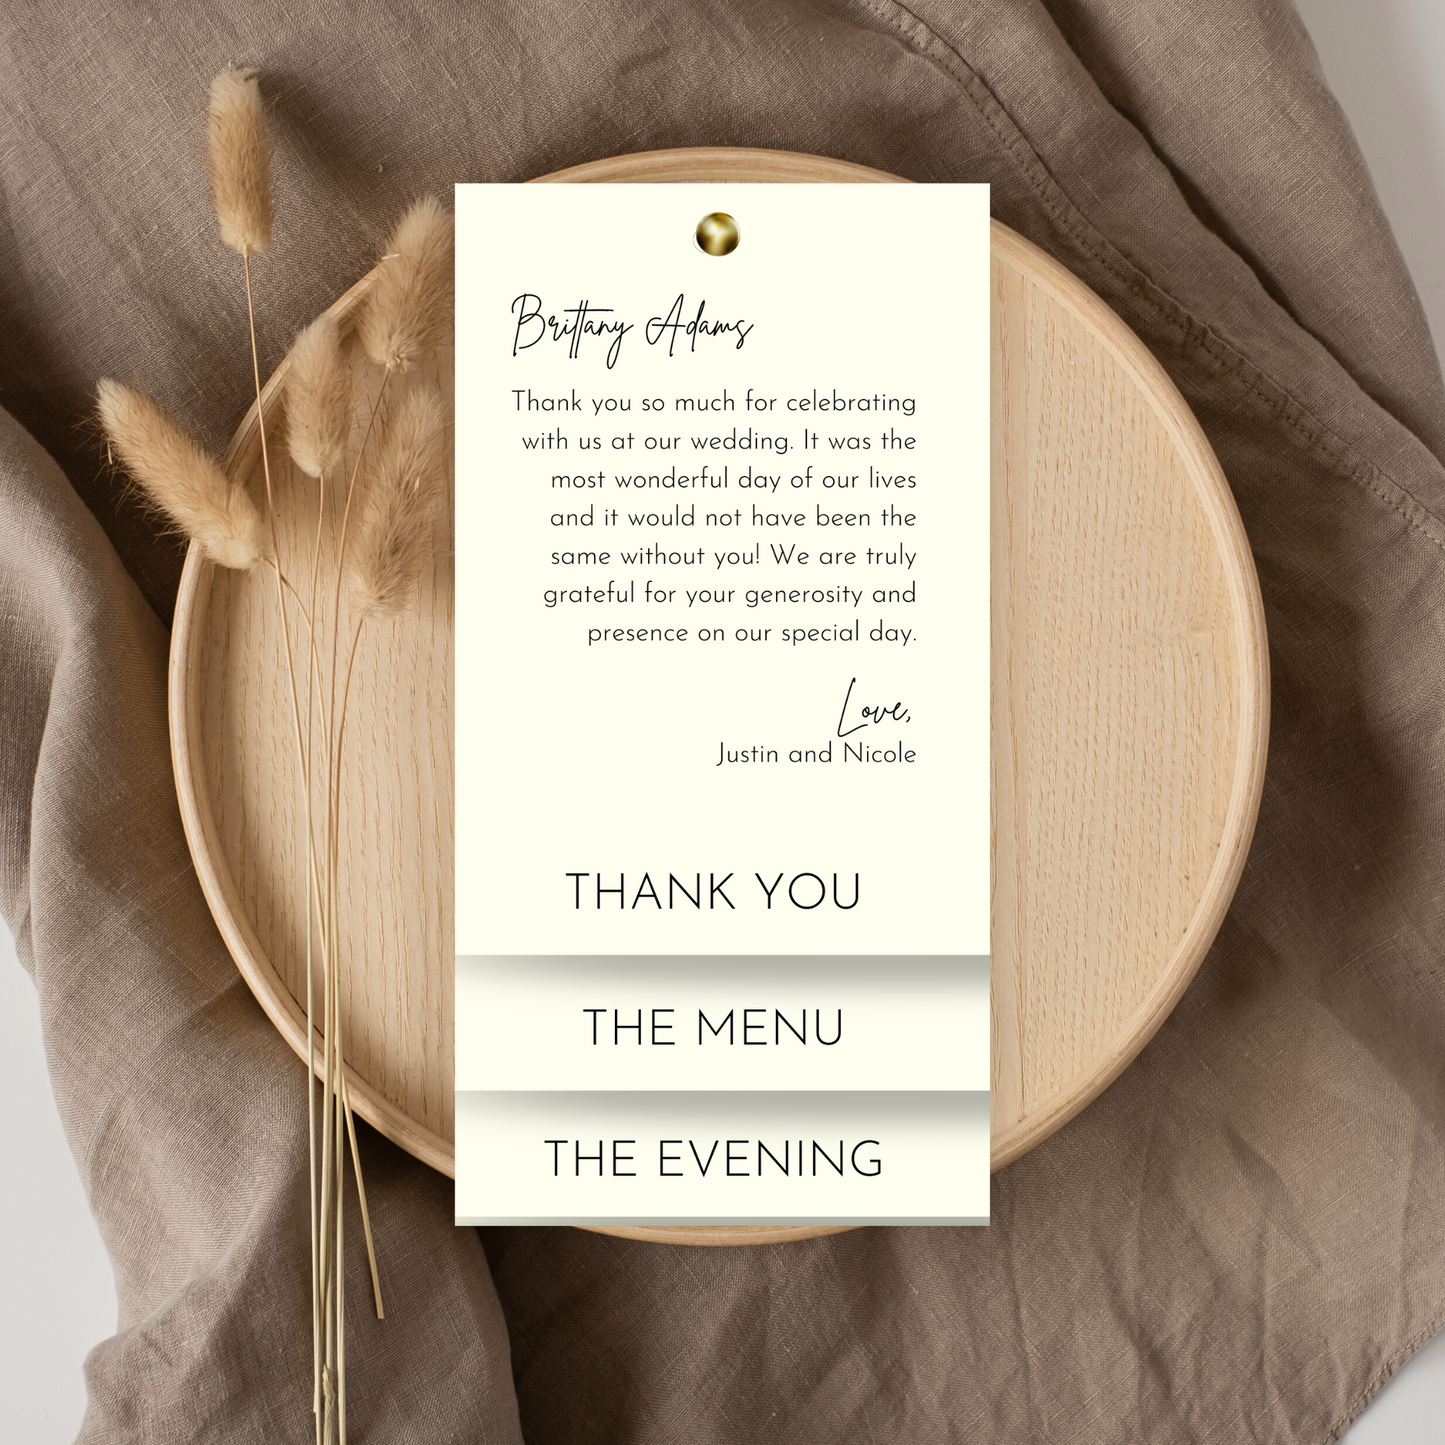 Ivory Thank You, Menu, and Order of Events Canva Template | Triple Layered Card | 4x8 Card | Canva INSTANT Download | Optional Fastener Hole